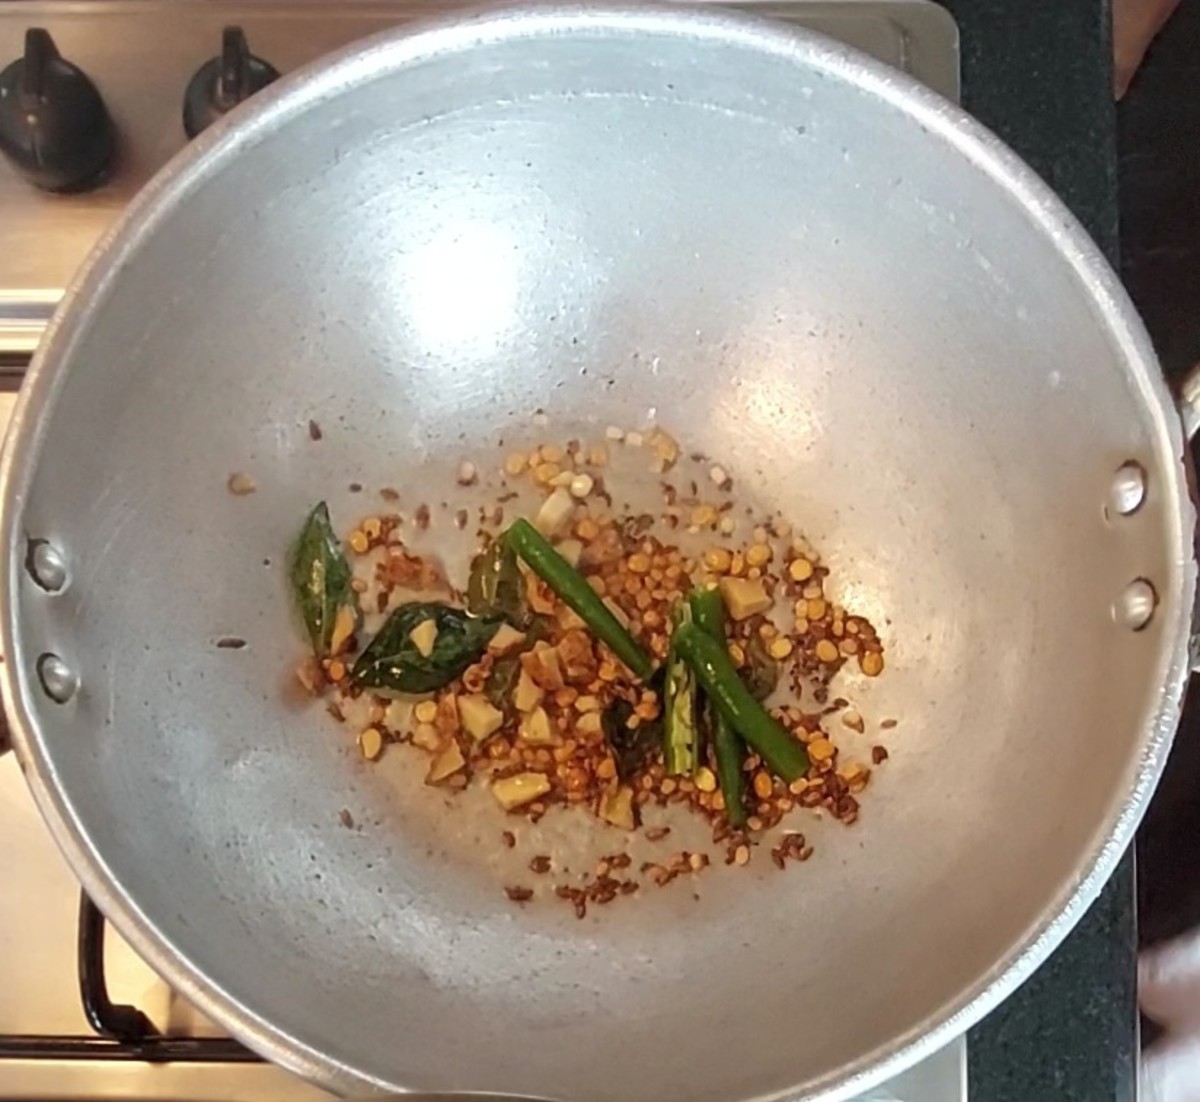 Saute for 1 minute or till lentils turn golden brown. Do not burn. Add 1 teaspoon chopped ginger and 1-2 green chilies. Saute for a few seconds.